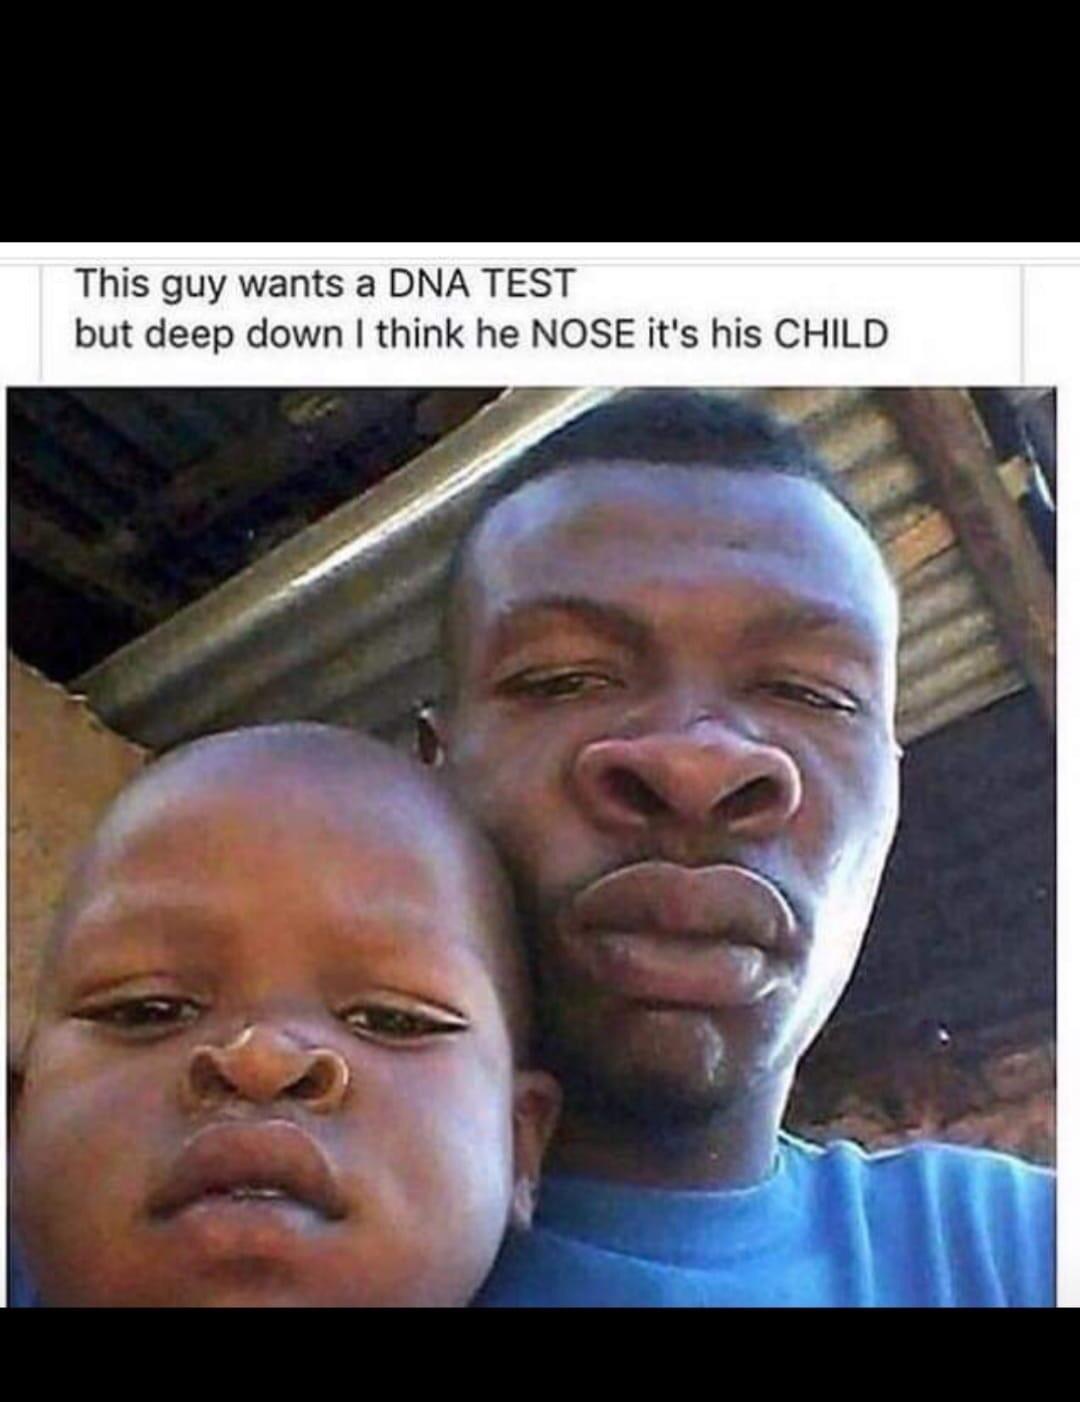 funny memes - fun randoms - nose meme - This guy wants a Dna Test but deep down I think he Nose it's his Child